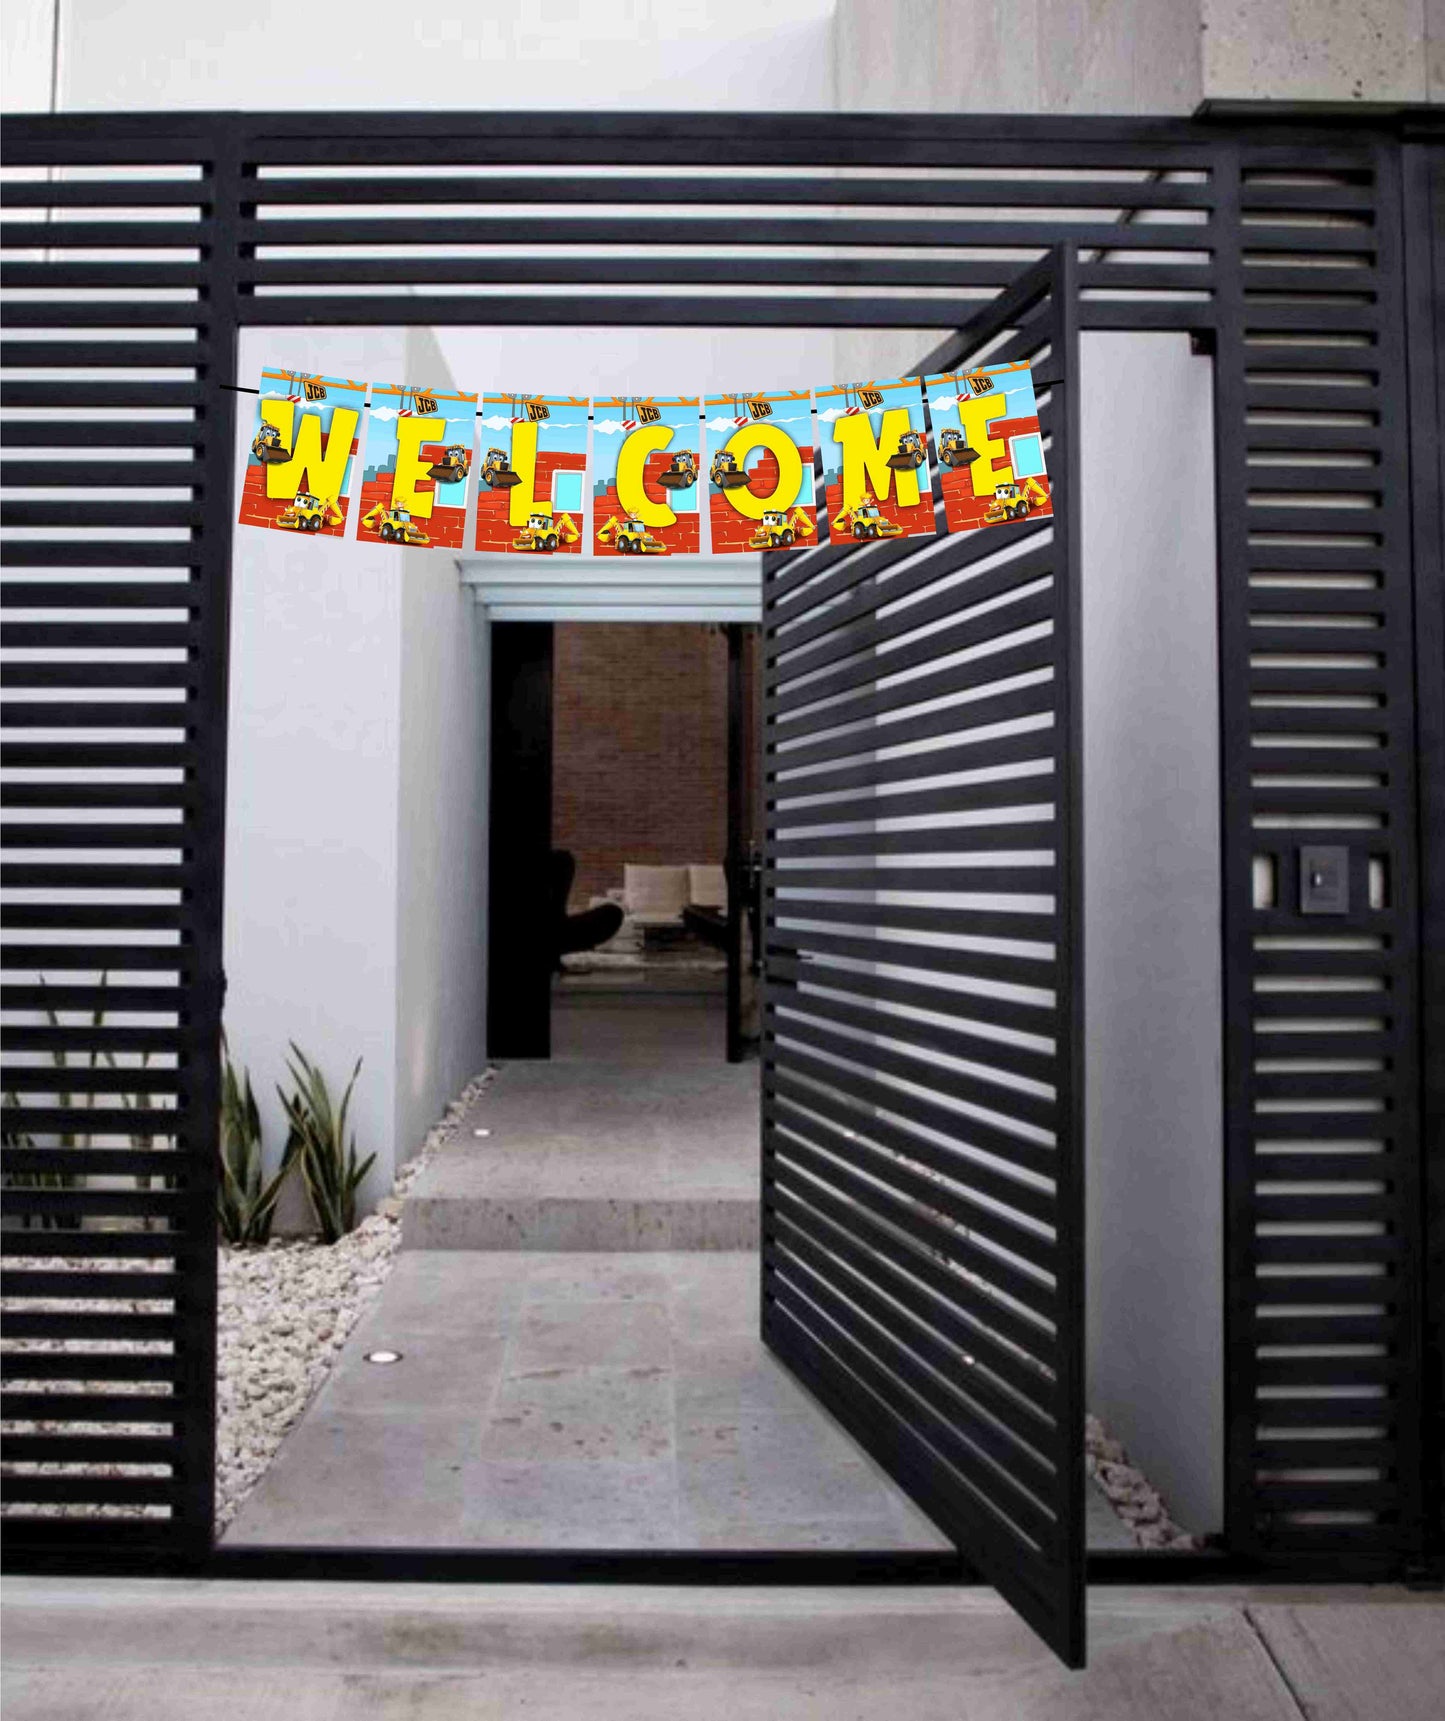 JCB Welcome Banner for Party Entrance Home Welcoming Birthday Decoration Party Item